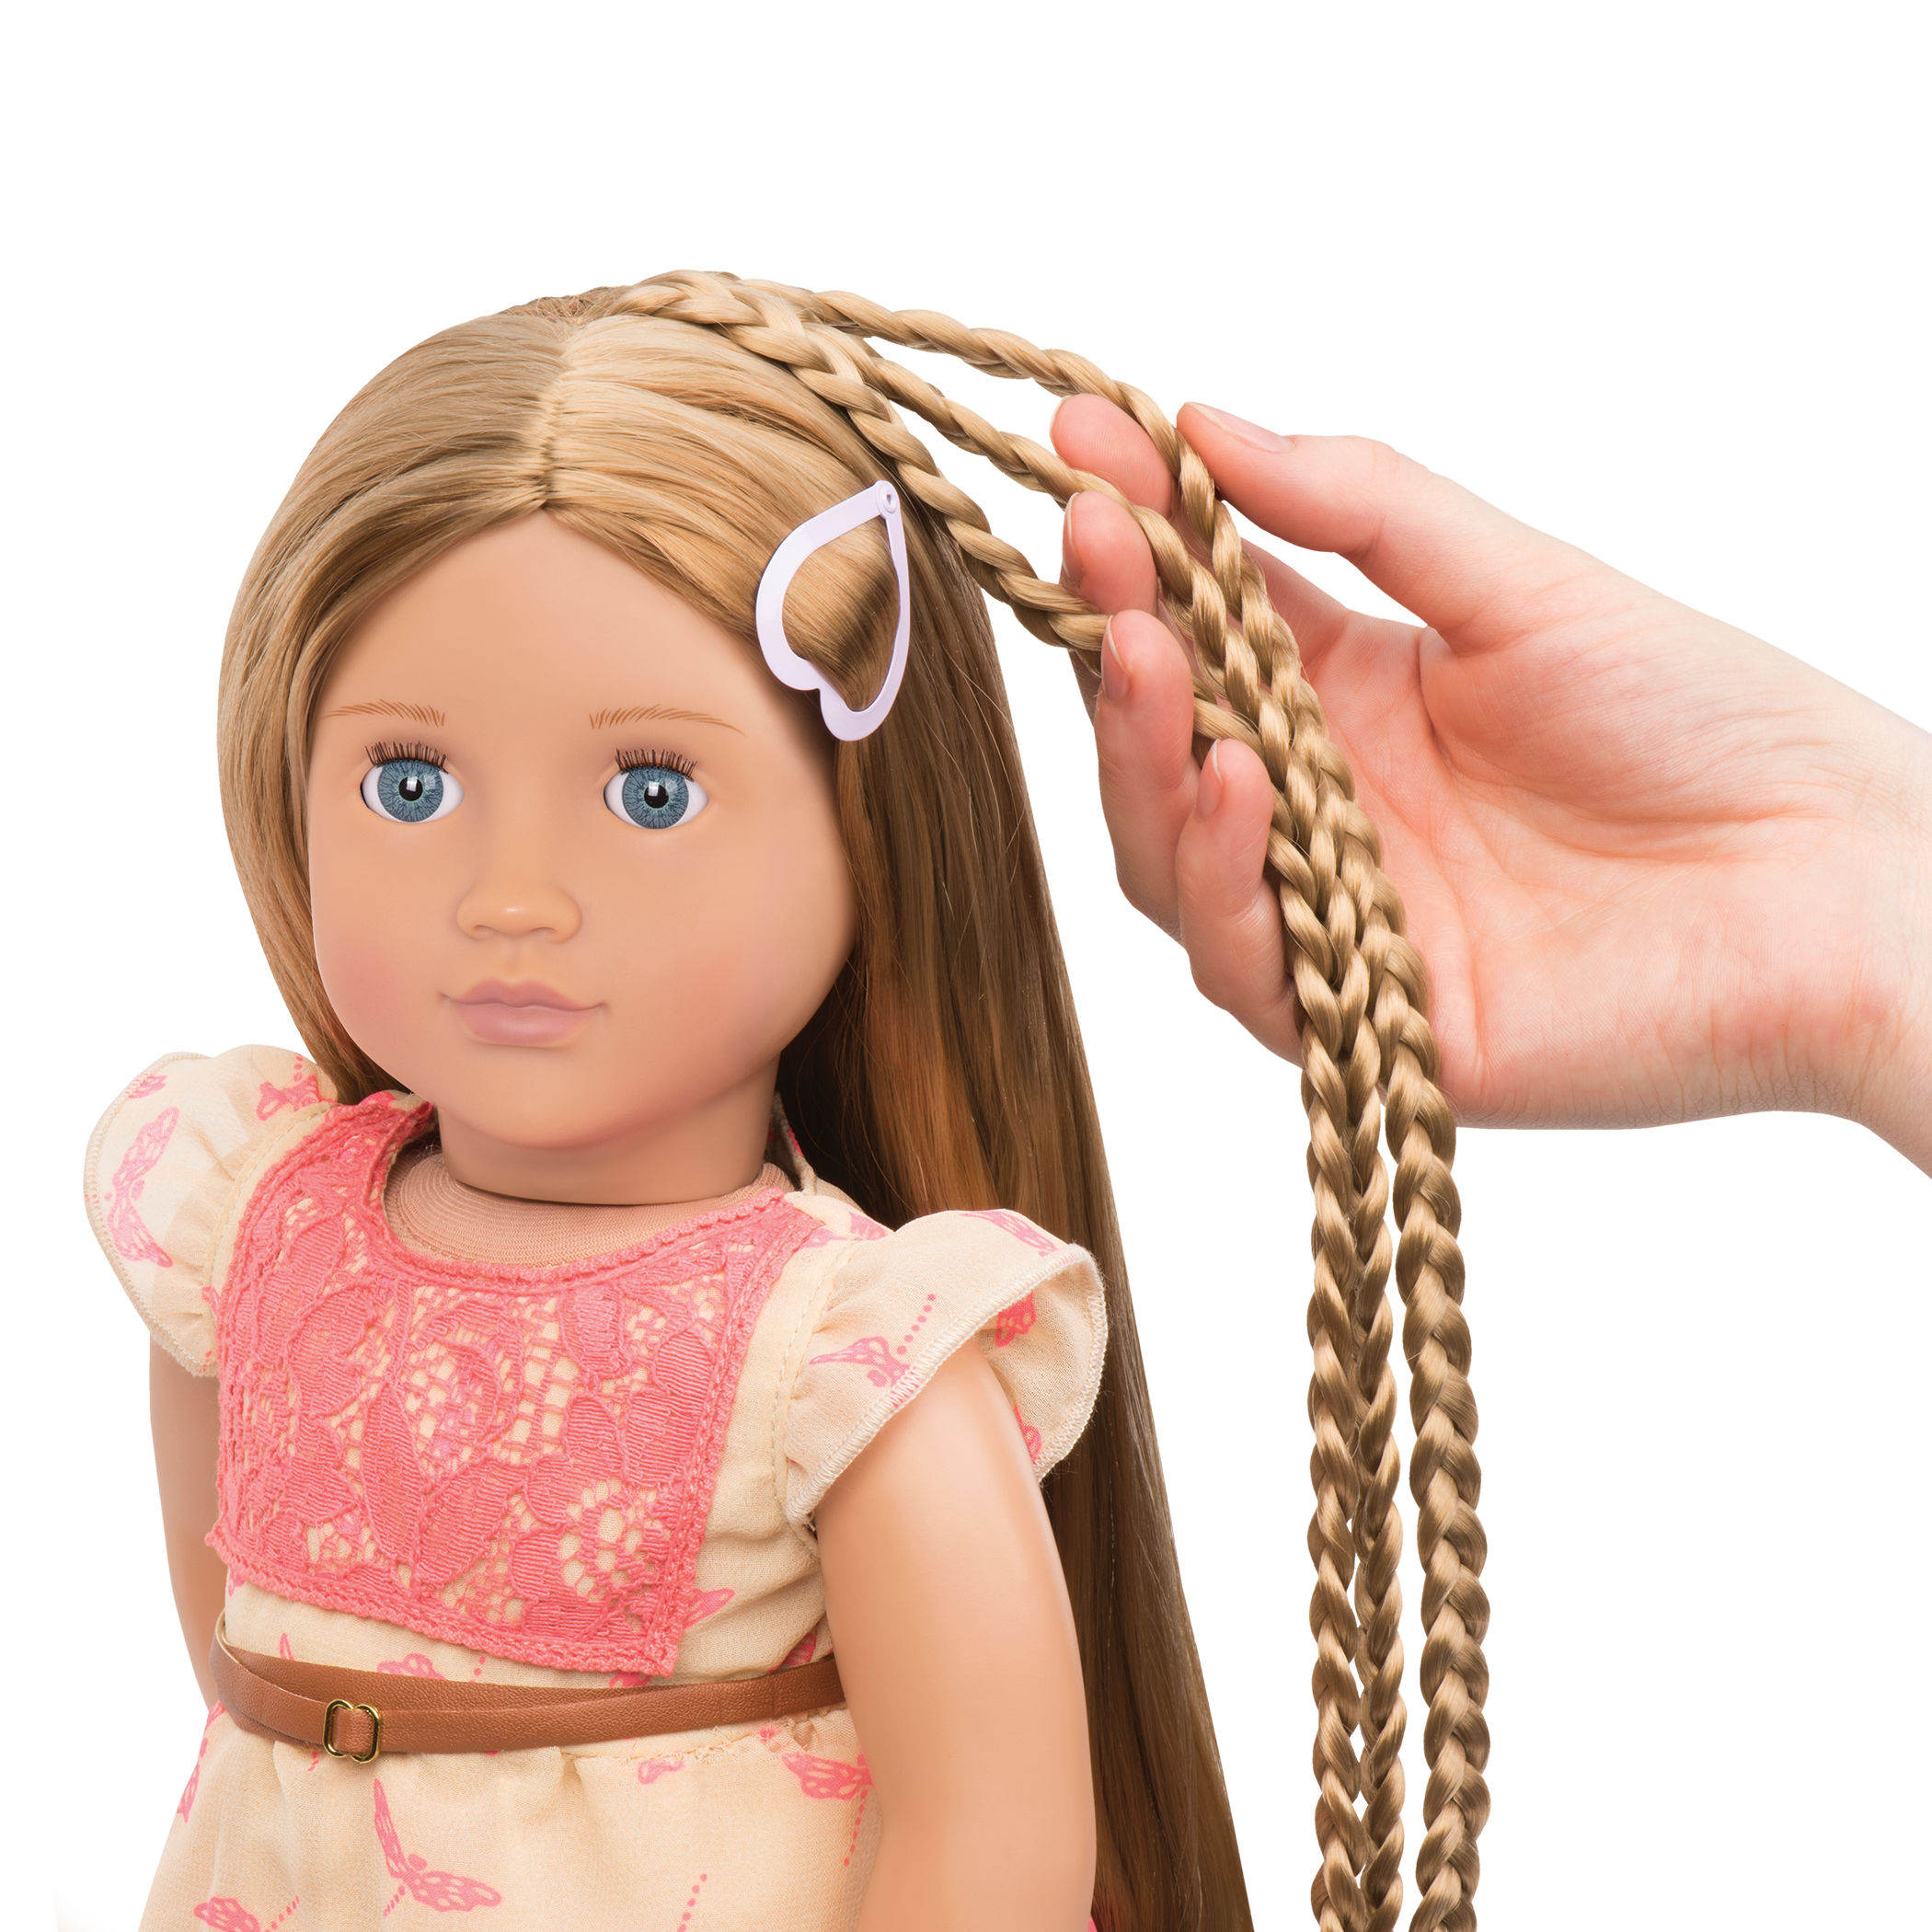 18-inch doll with light-brown hair, blue eyes and extensions